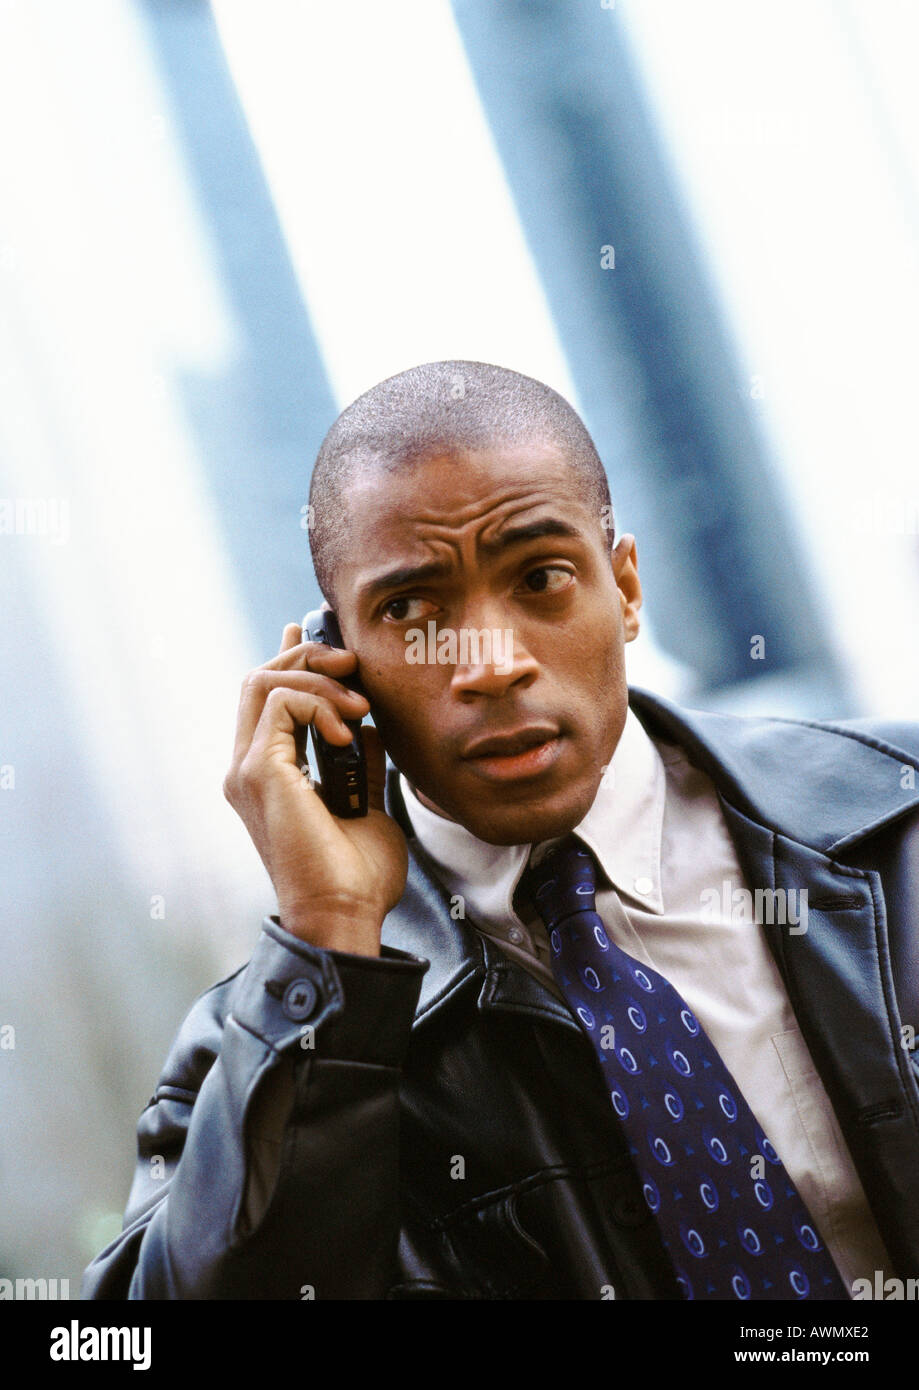 Businessman using cellular phone and furrowing brow, portrait. Stock Photo